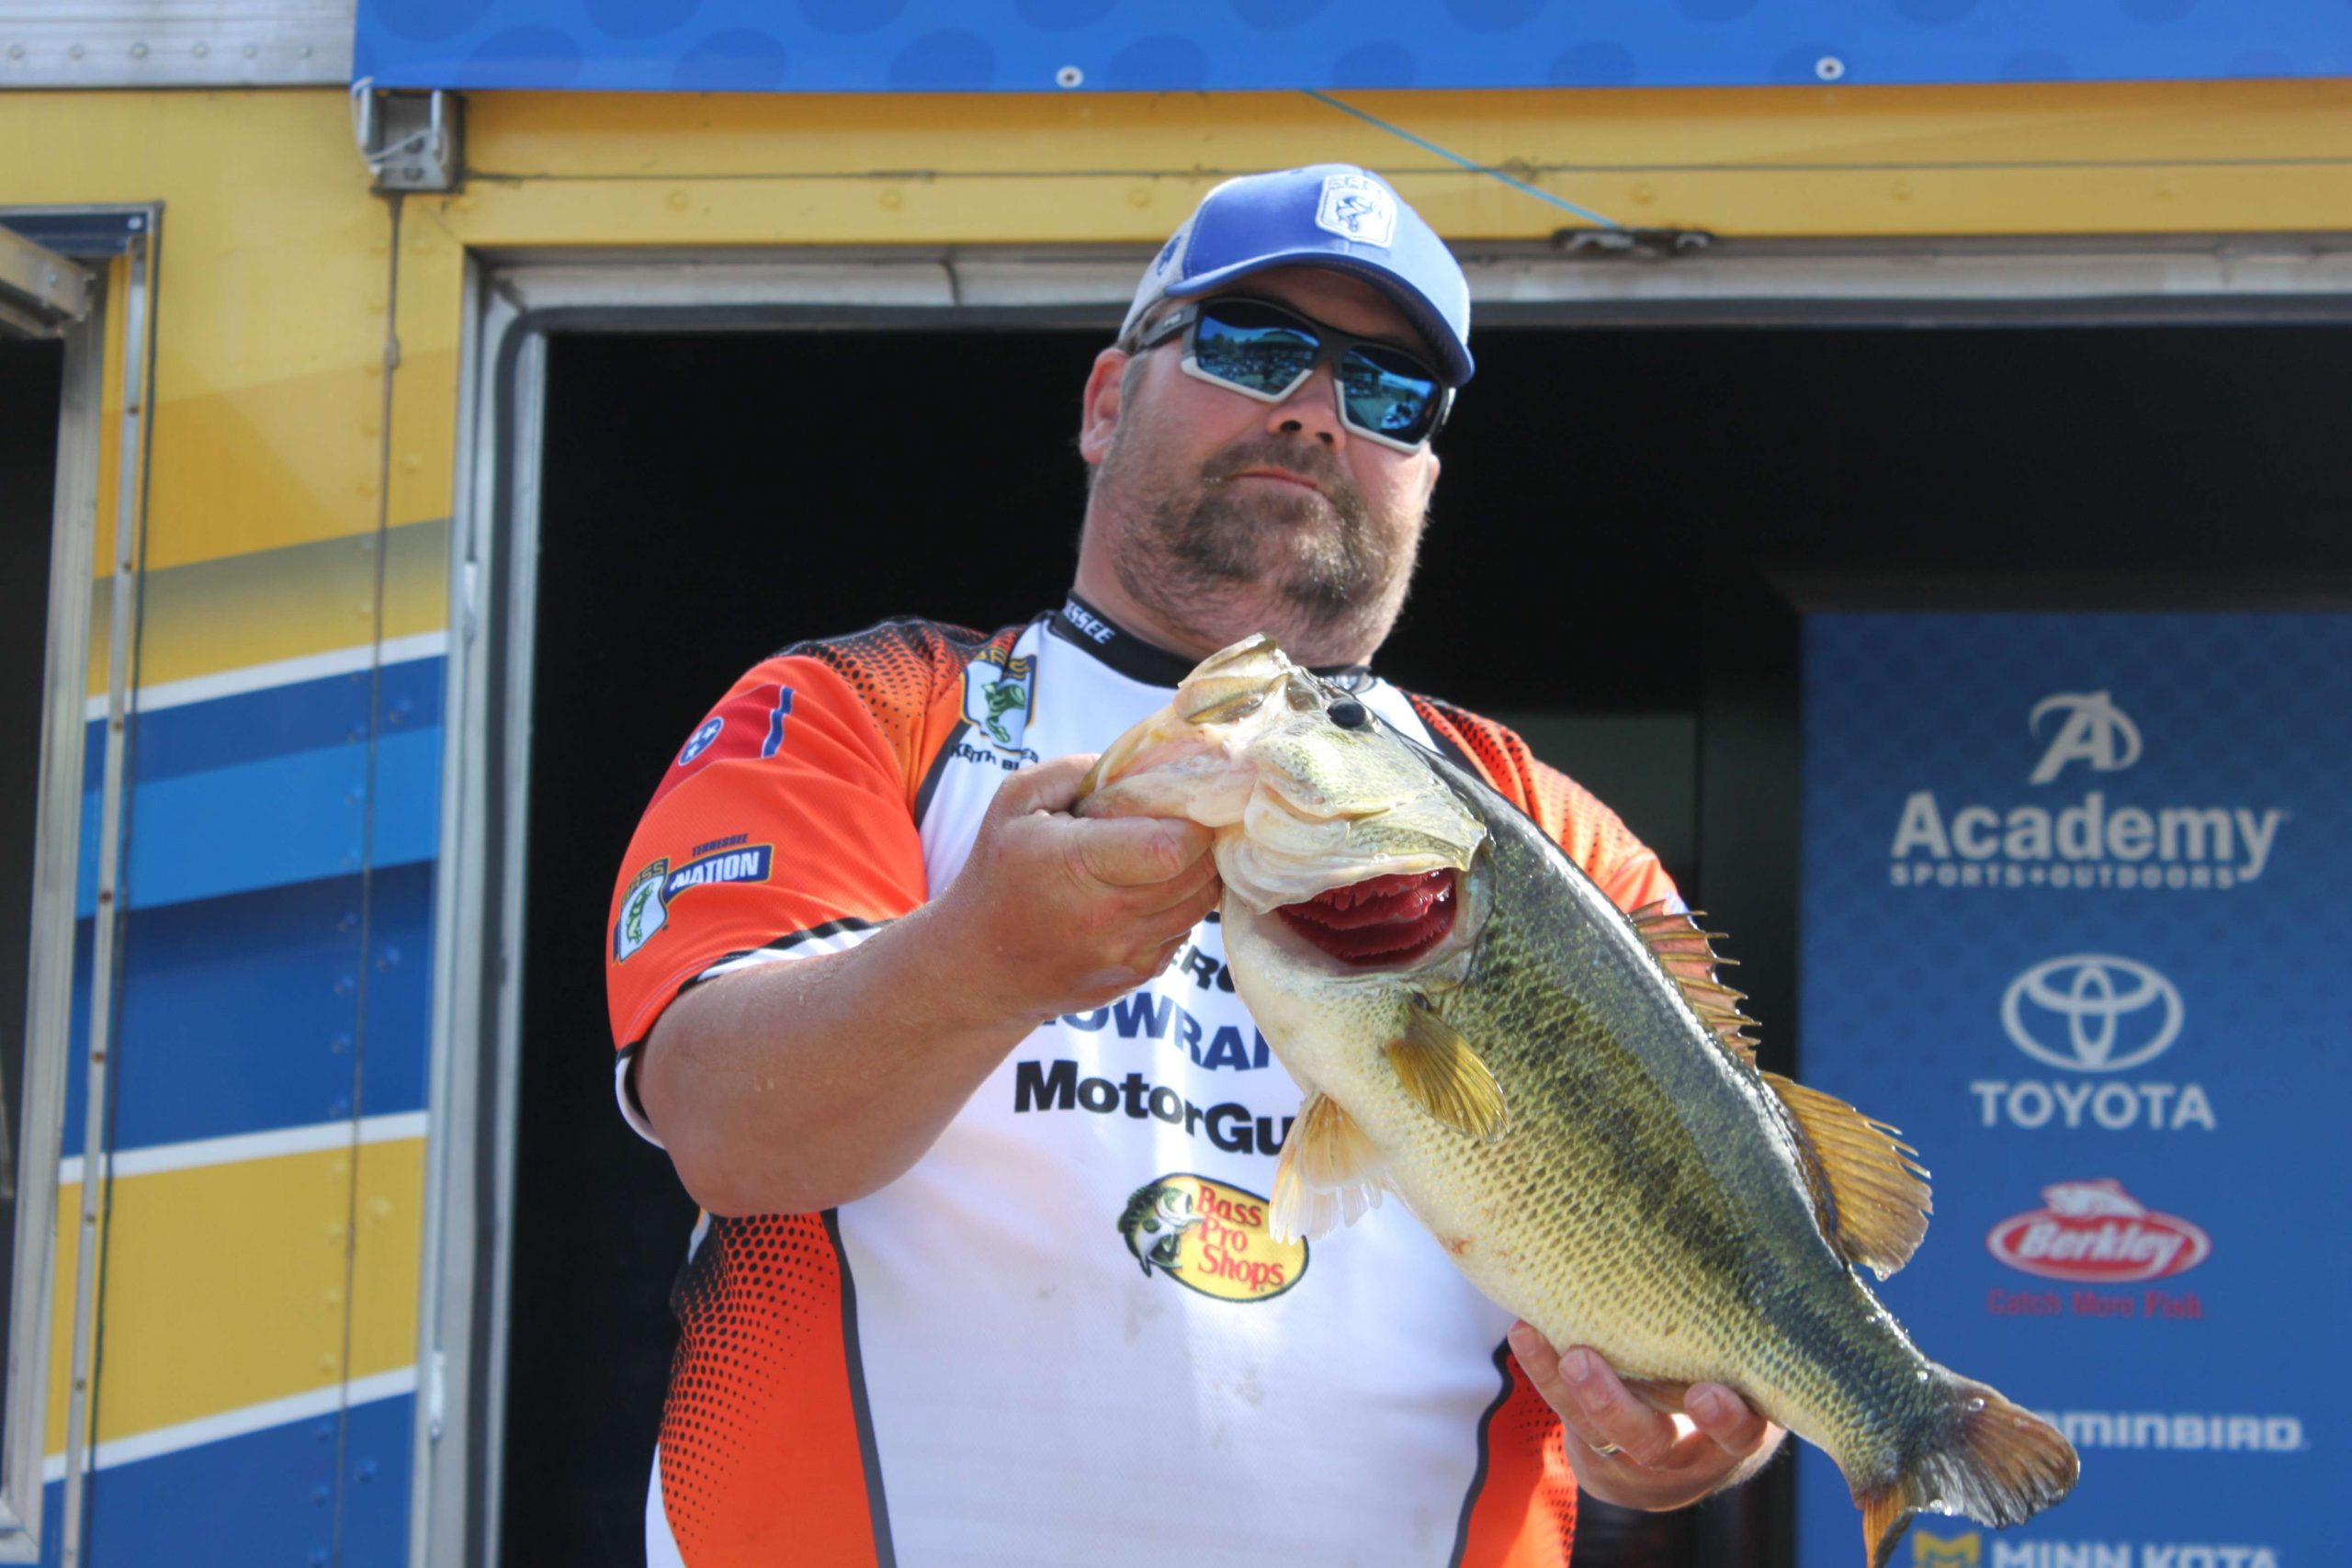  Keith Broyles of Tennessee finished right on the money line for boaters. He's in 38th place with 27-13.
